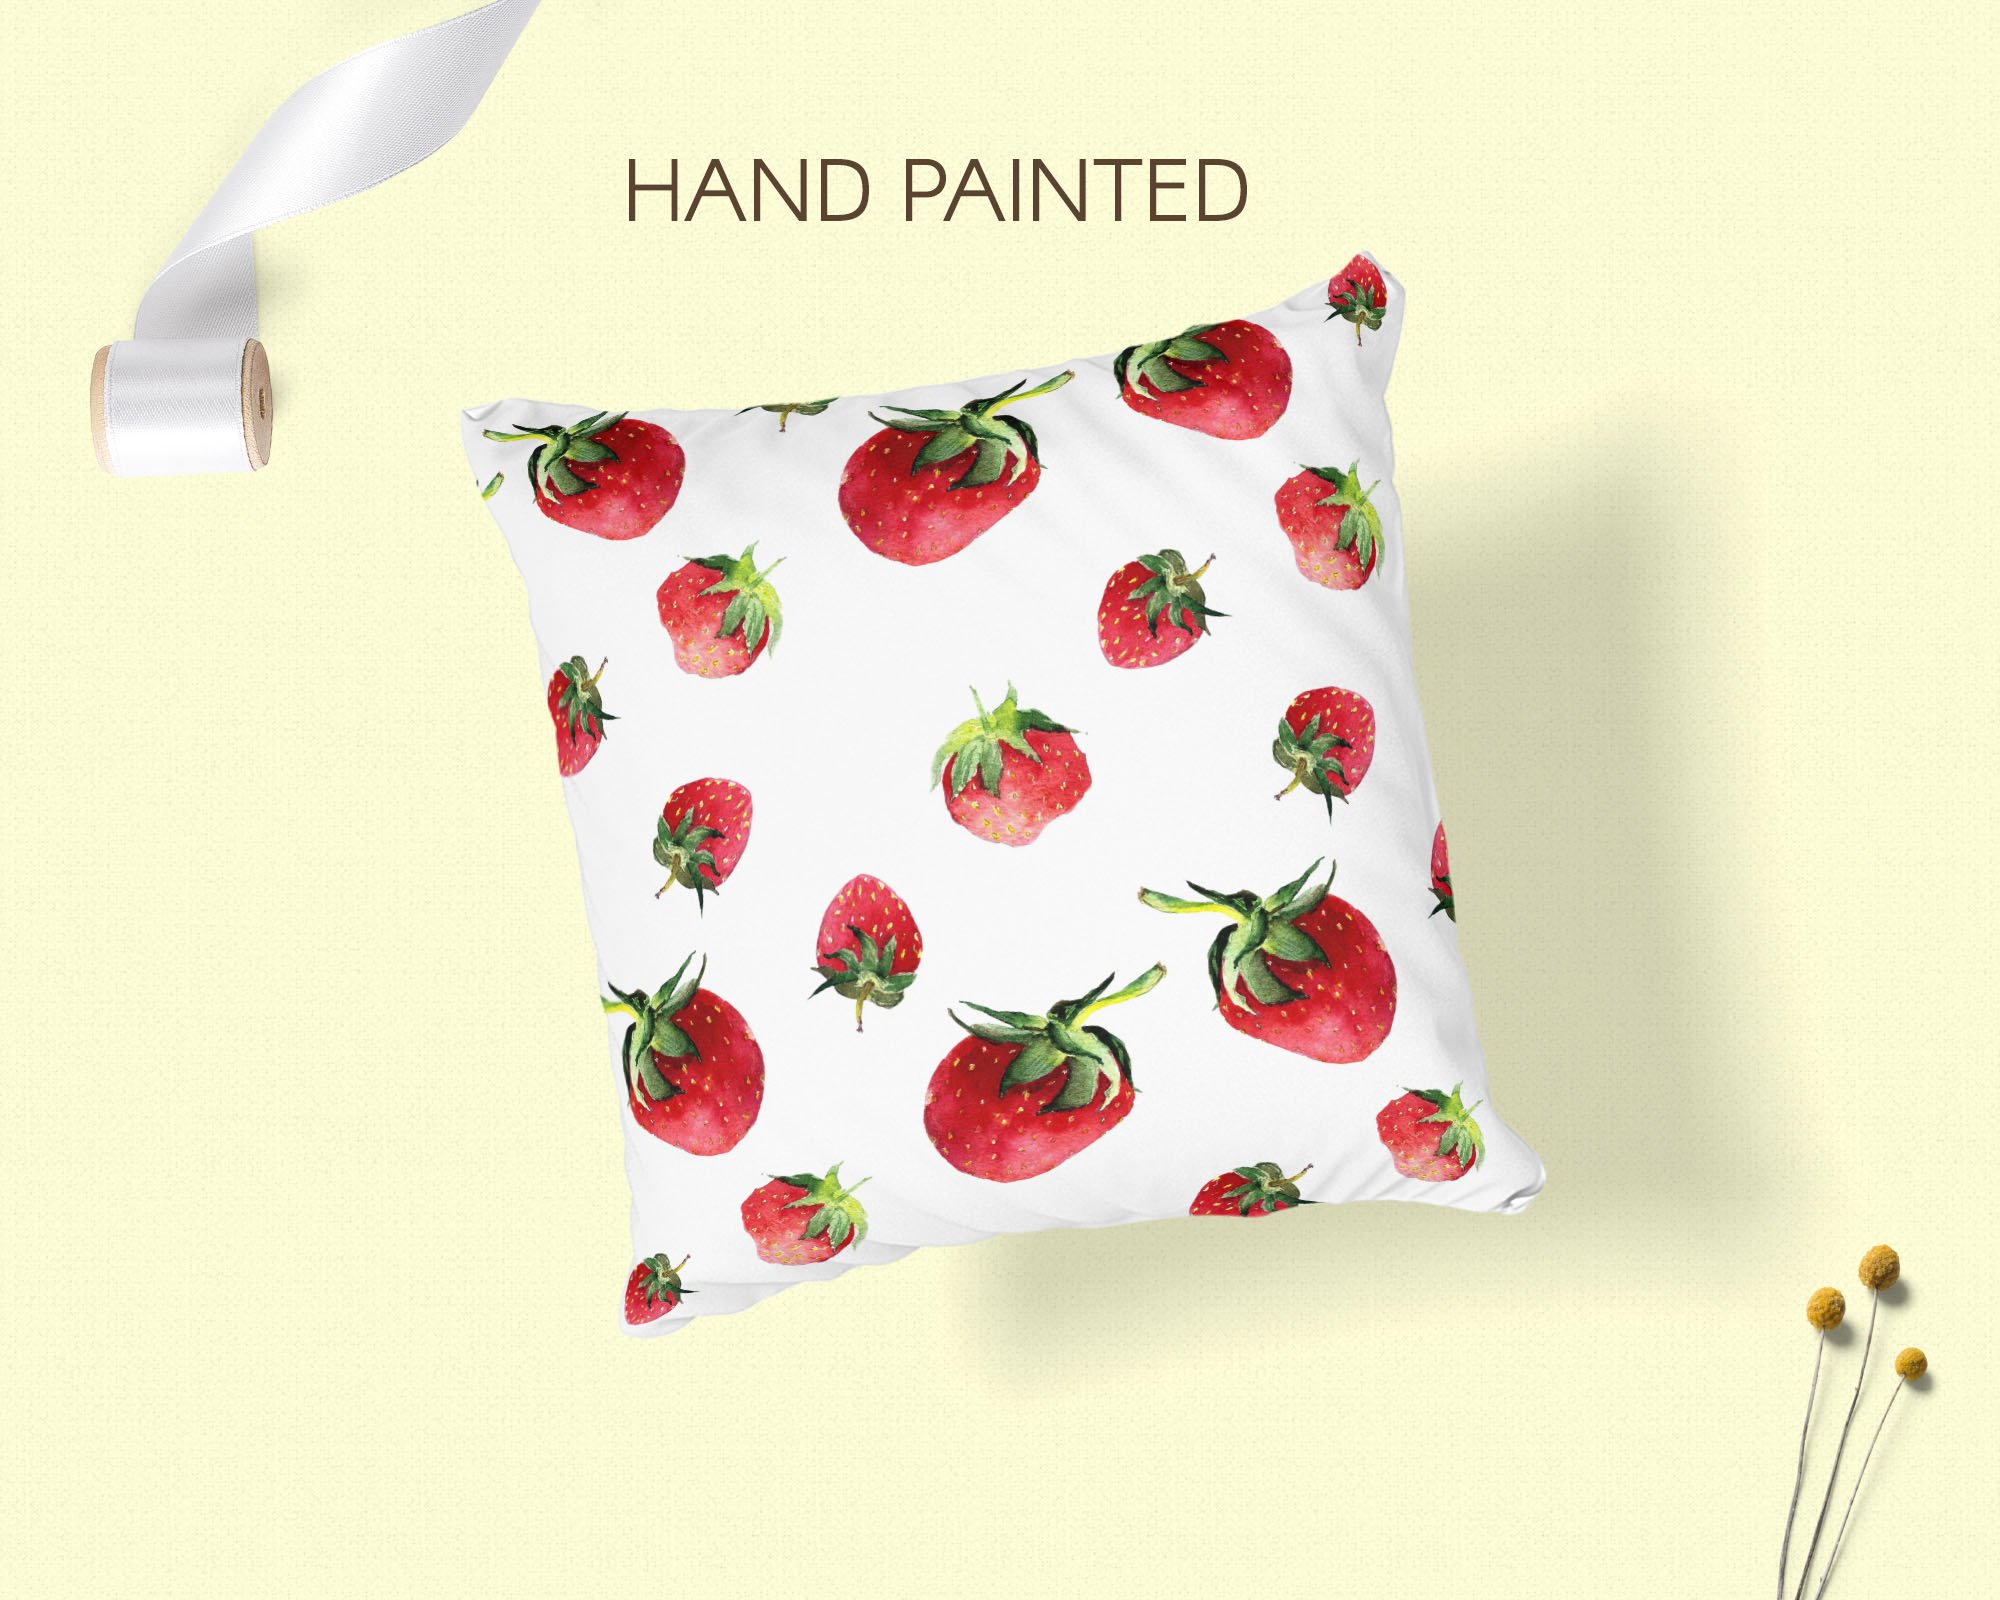 Black lettering "Hand painted" and white pillow with illustrations of a strawberry.